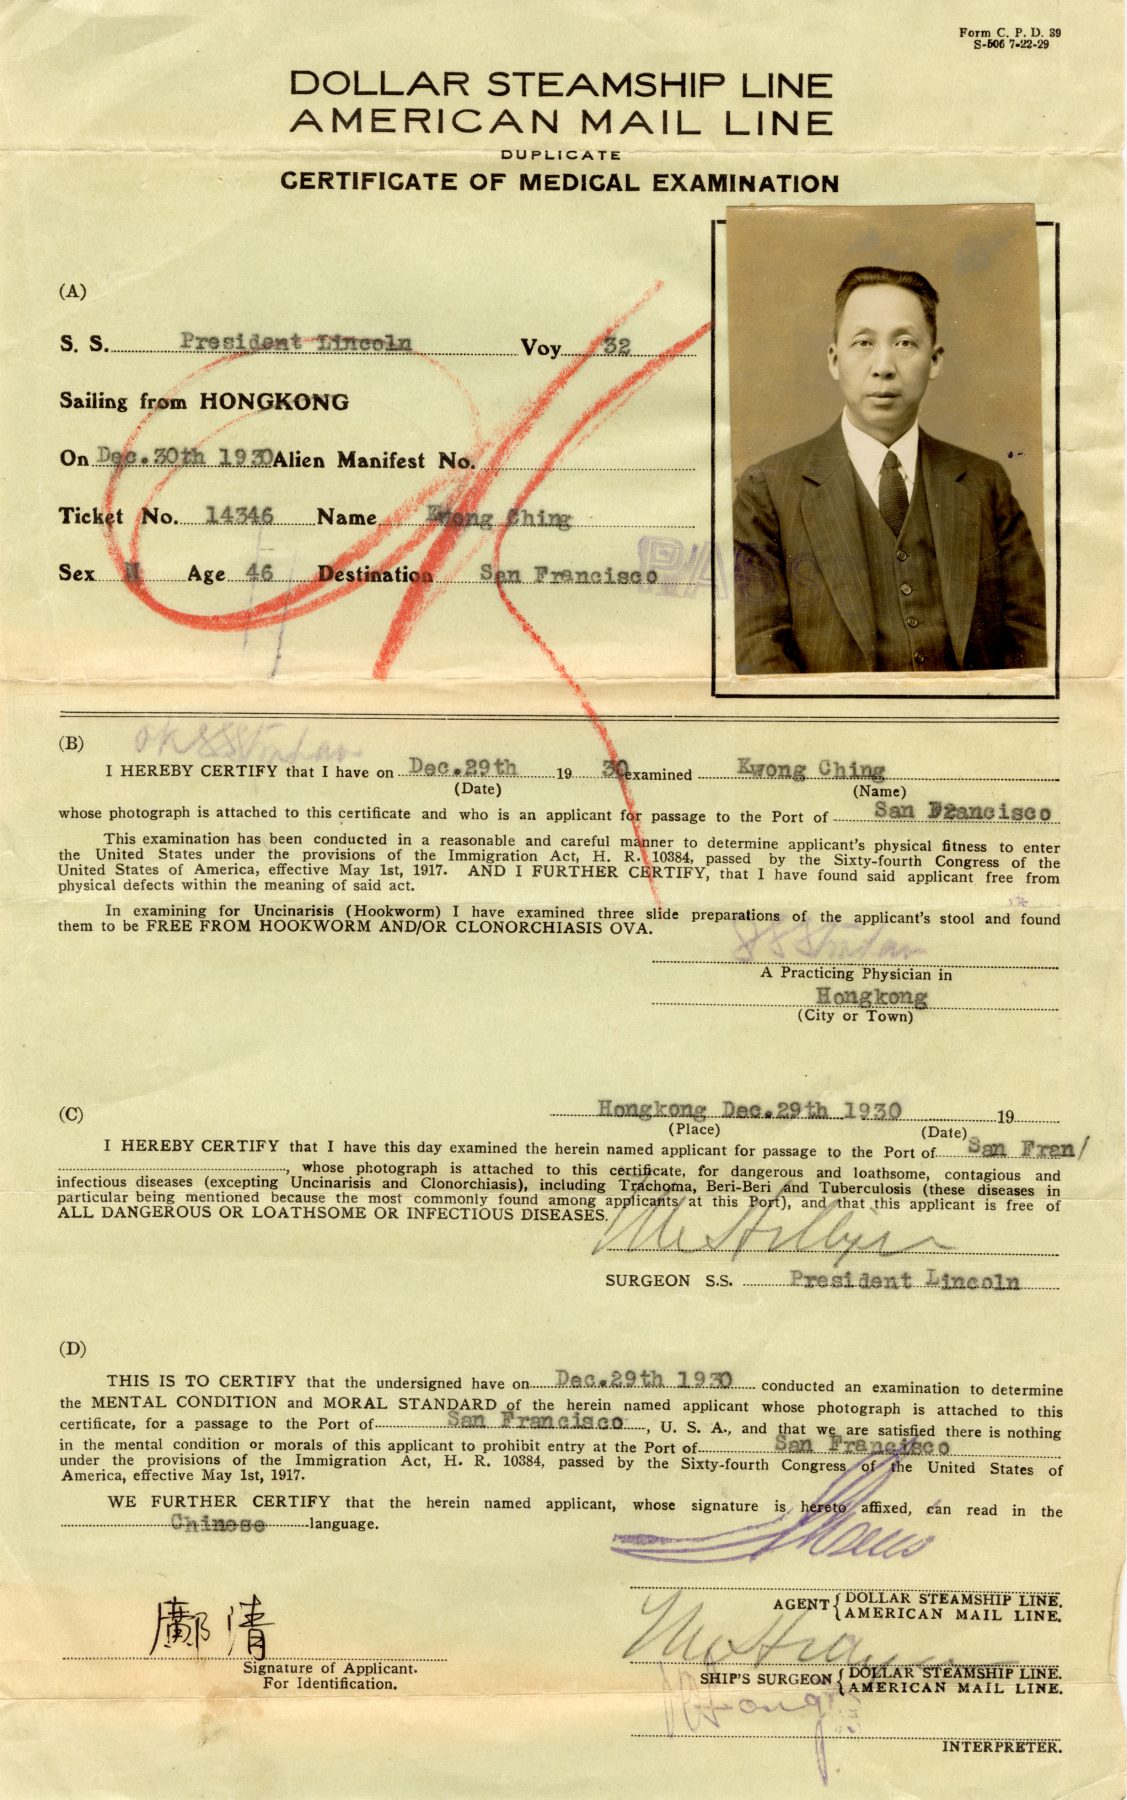 Dollar Steamship Line Certificate of Medical Examination, 1930. Courtesy of Roy Delbyck, Museum of Chinese in America (MOCA) Collection.